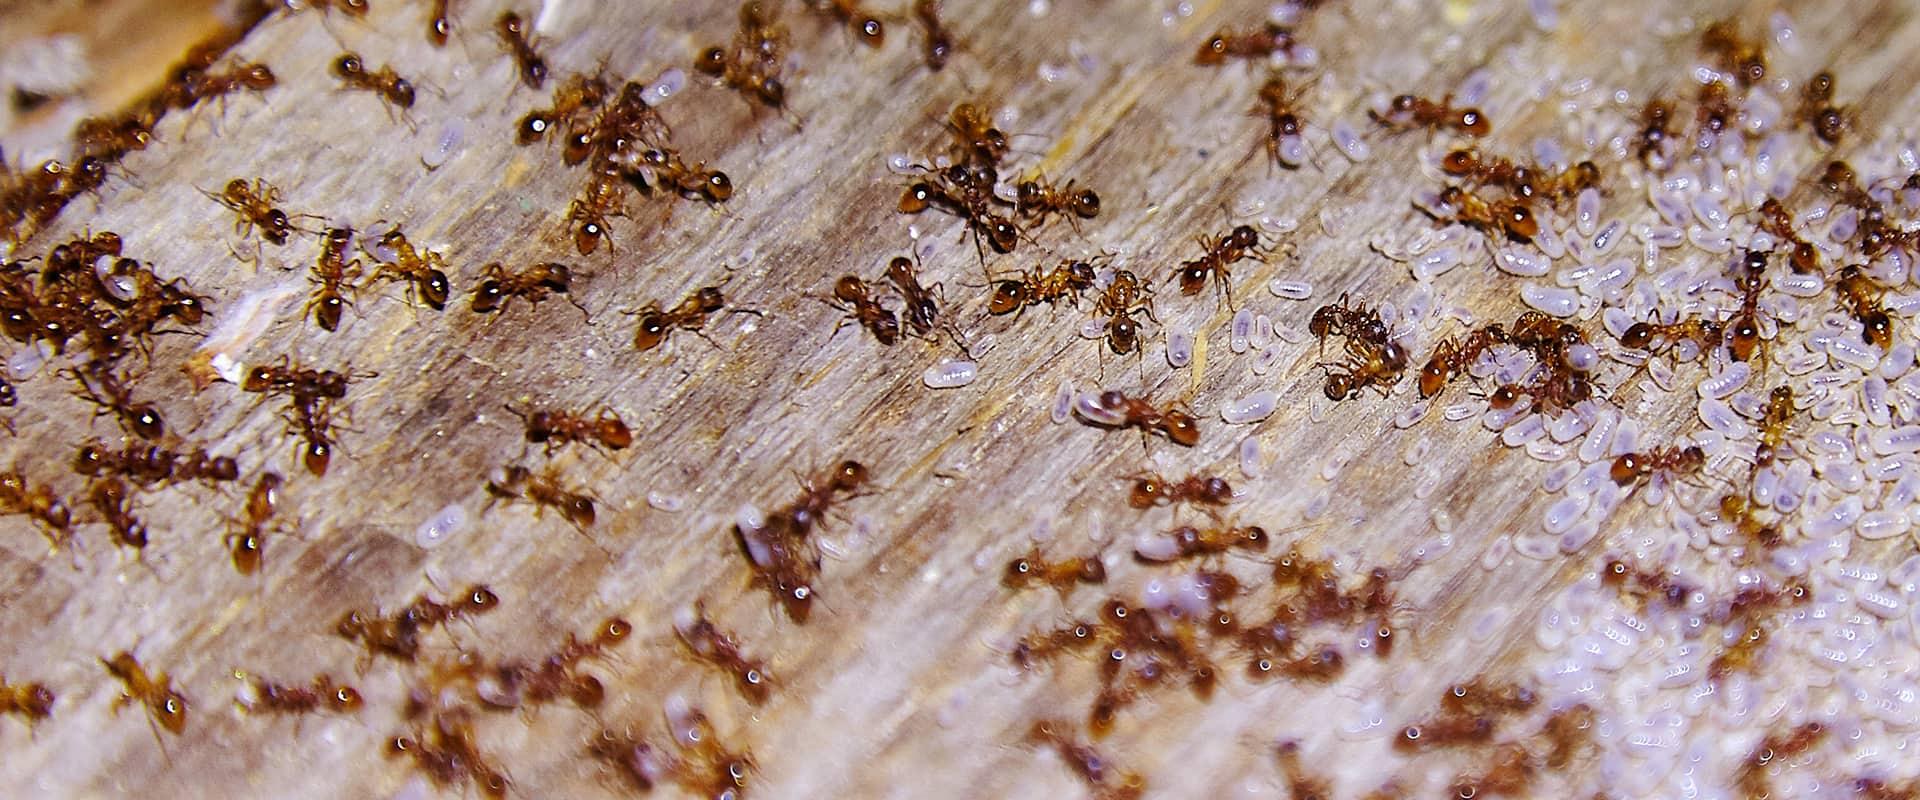 an ant infestation in a home in caldwell new jersey